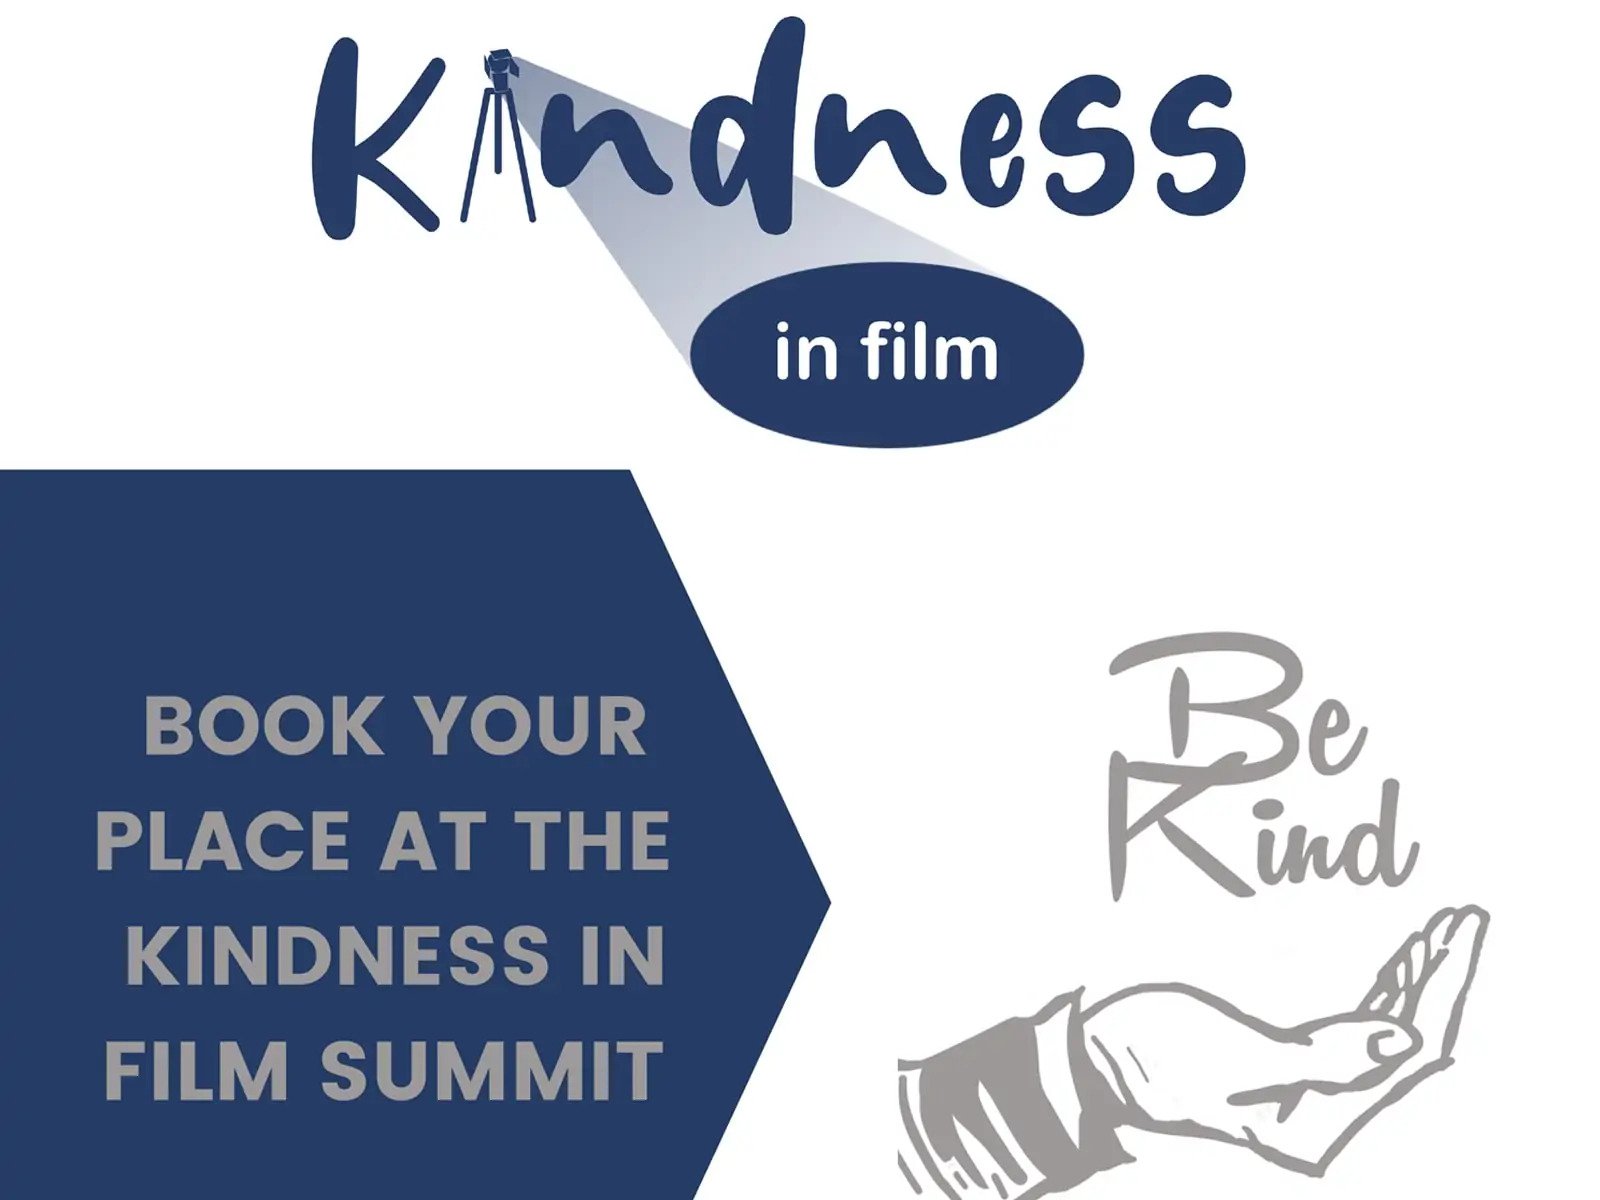 Kindness in Film Summit 2021 is now live